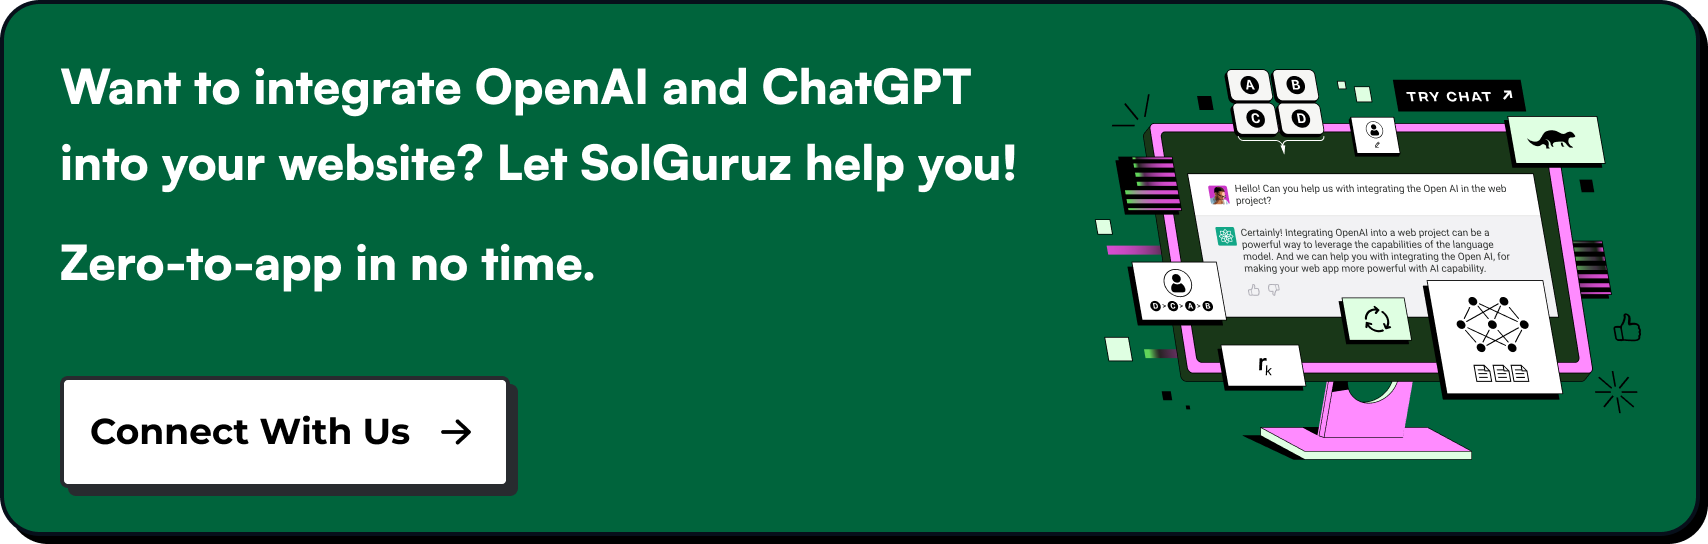 If you want to integrate OpenAI and ChatGPT into your website, let SolGuruz help you!